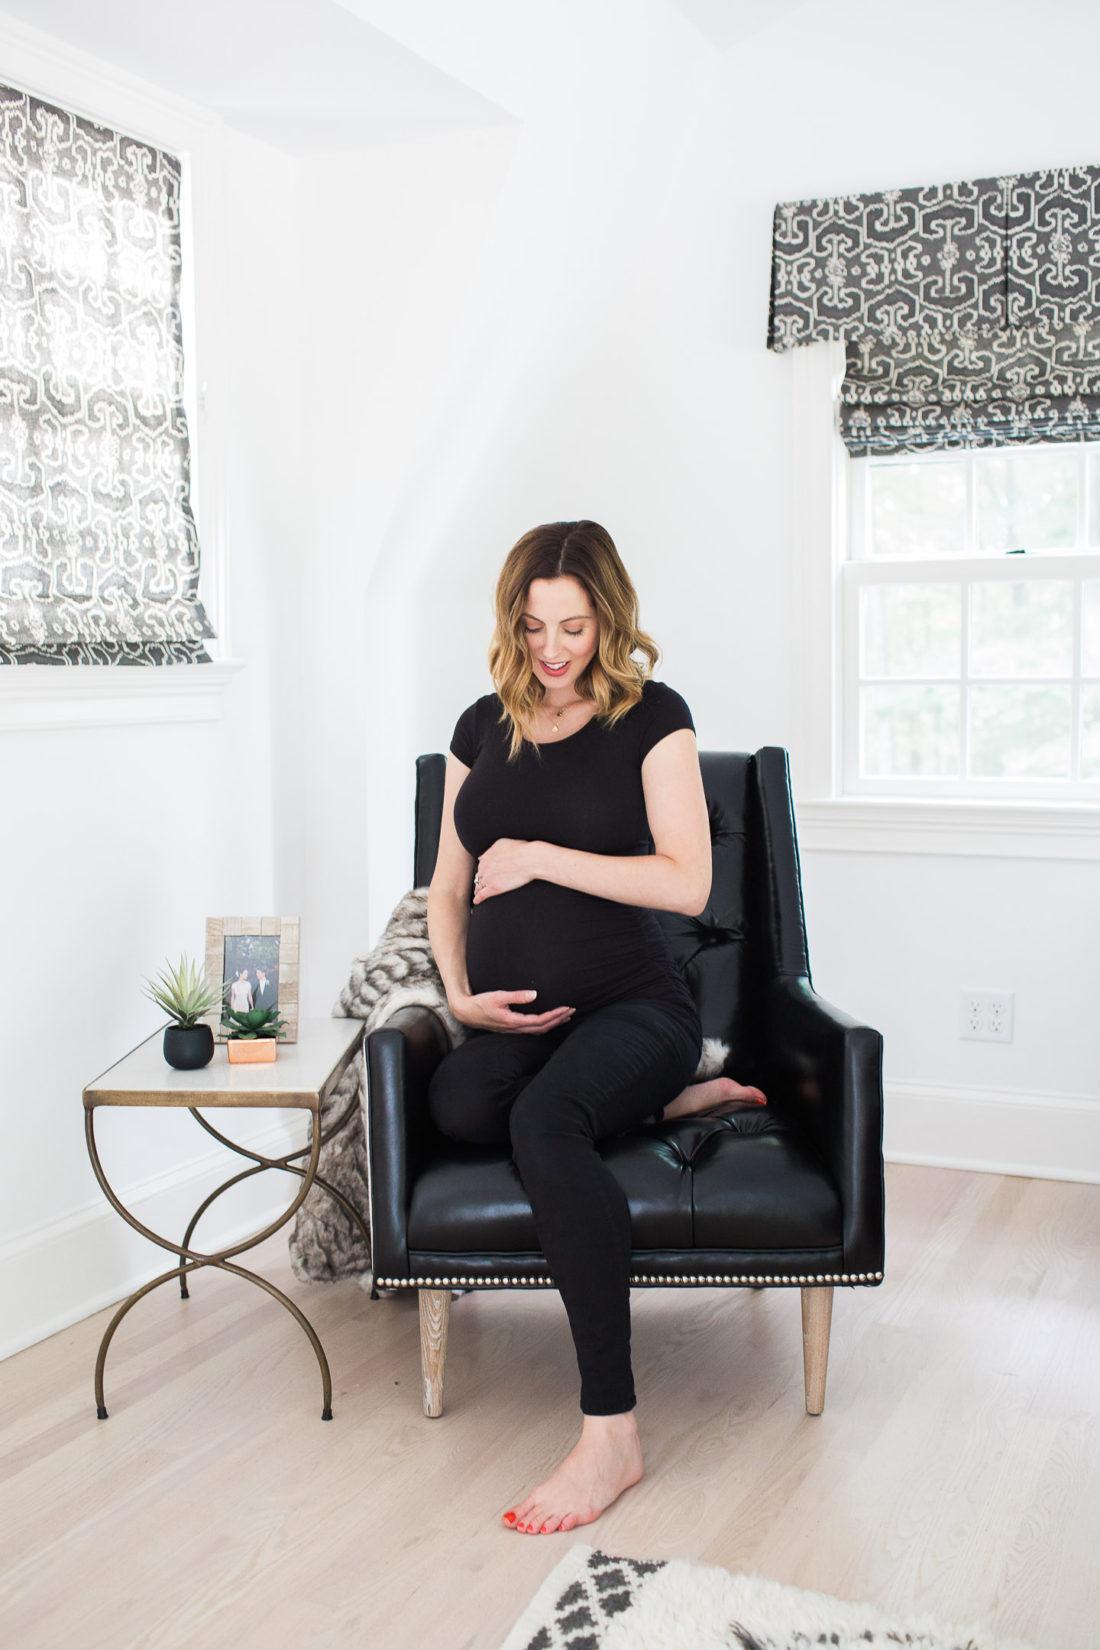 Eva Amurri Martino of lifestyle and motherhood blog Happily Eva After cradling her baby bump in a black maternity top and jeans while sitting on a leather armchair in her master bedroom